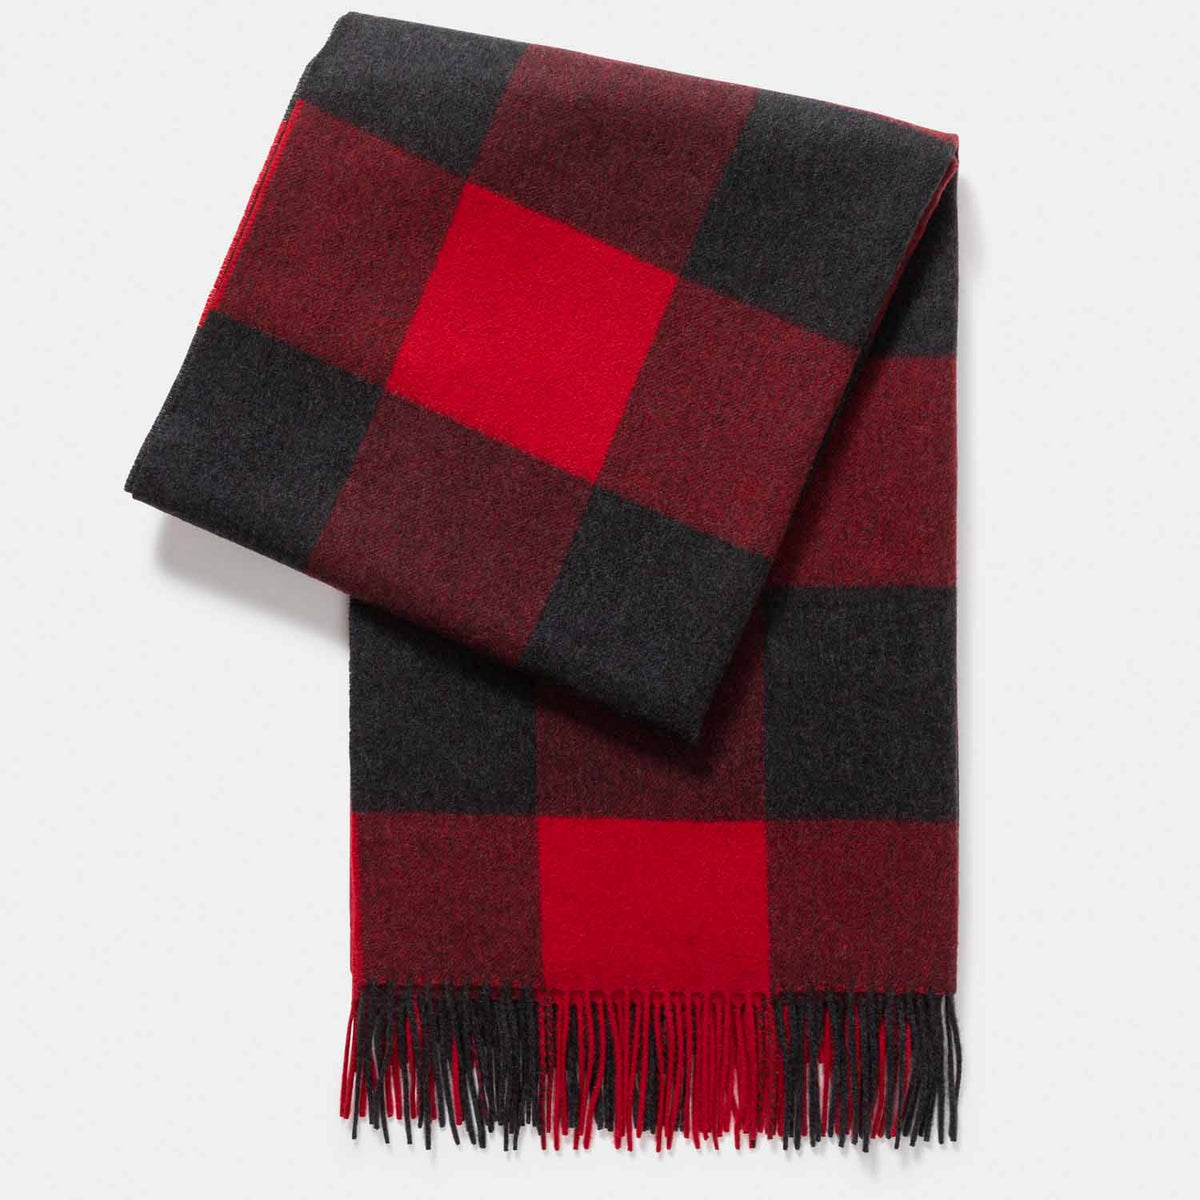 Picture of a woven cashmere throw in red and black buffalo plaid.